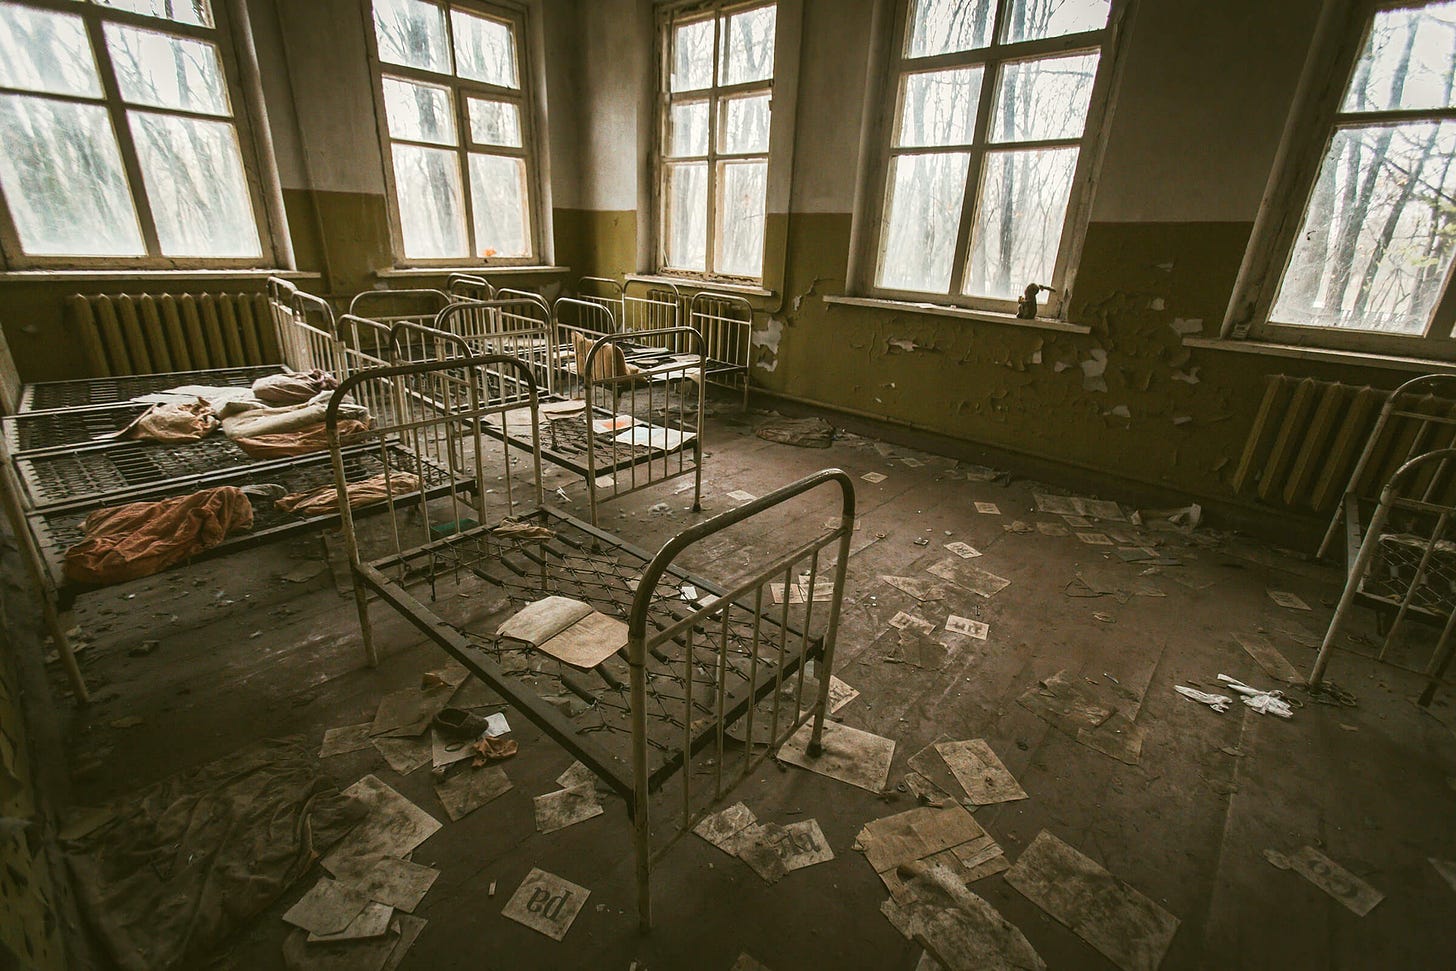 Bed frames in an abandoned room in an asylum, papers on the floor, big windows.